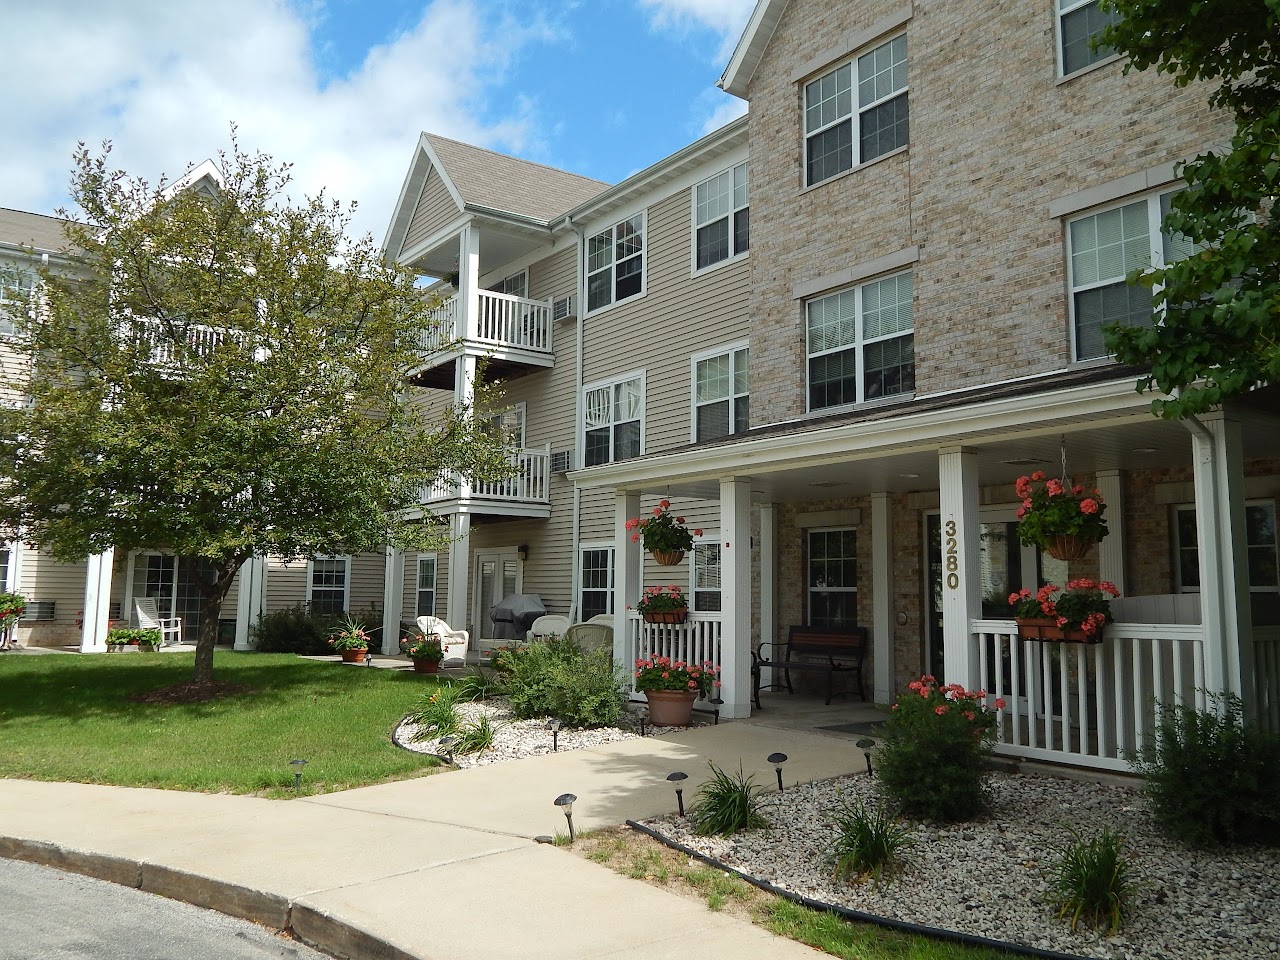 Photo of HILLSIDE WOODS APTS. Affordable housing located at 3280 HILLSIDE DR DELAFIELD, WI 53018